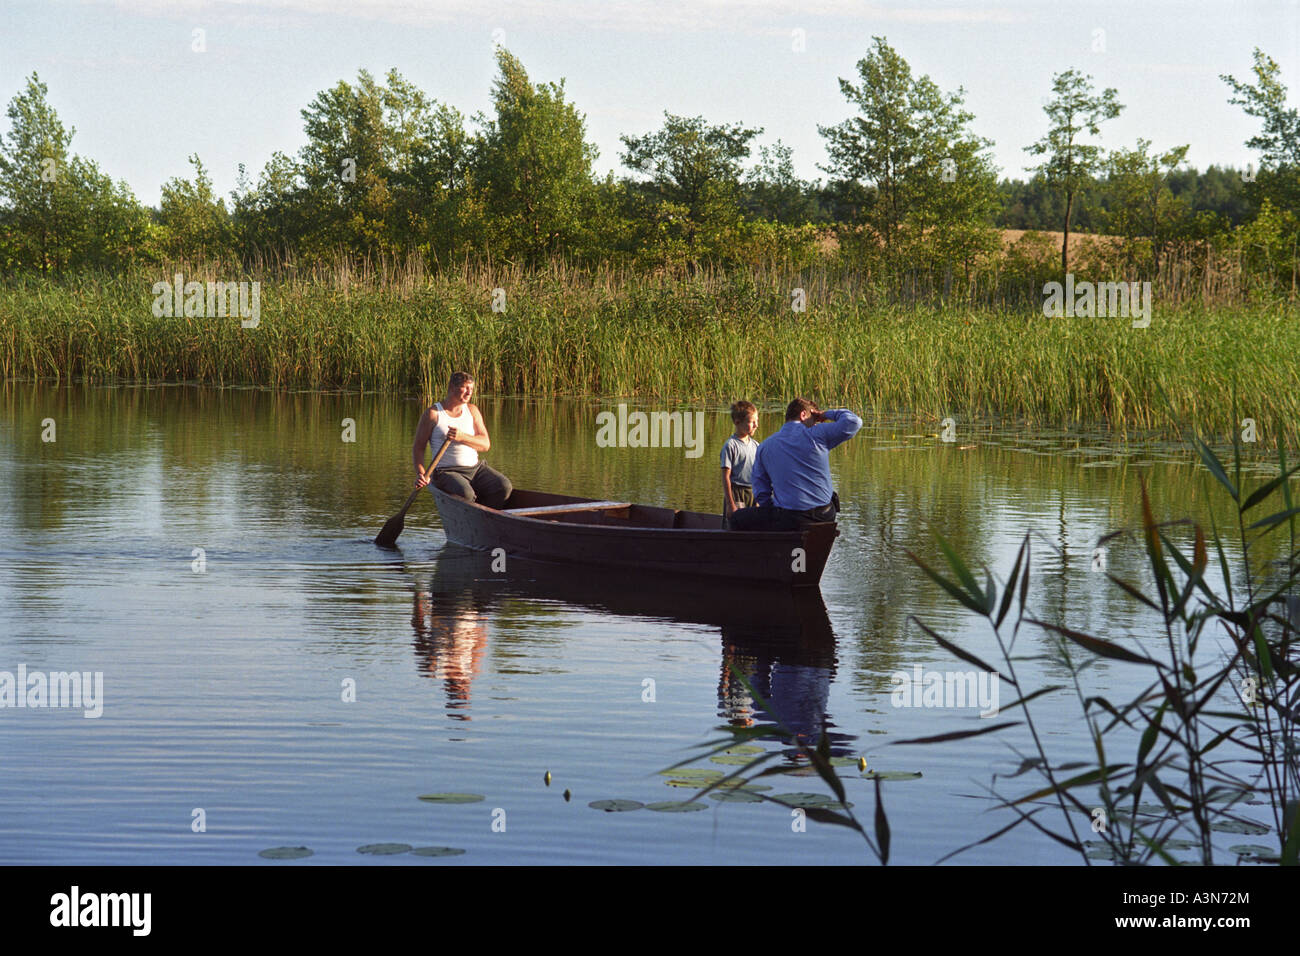 People in a boat on a lake, Suwalki, Poland Stock Photo